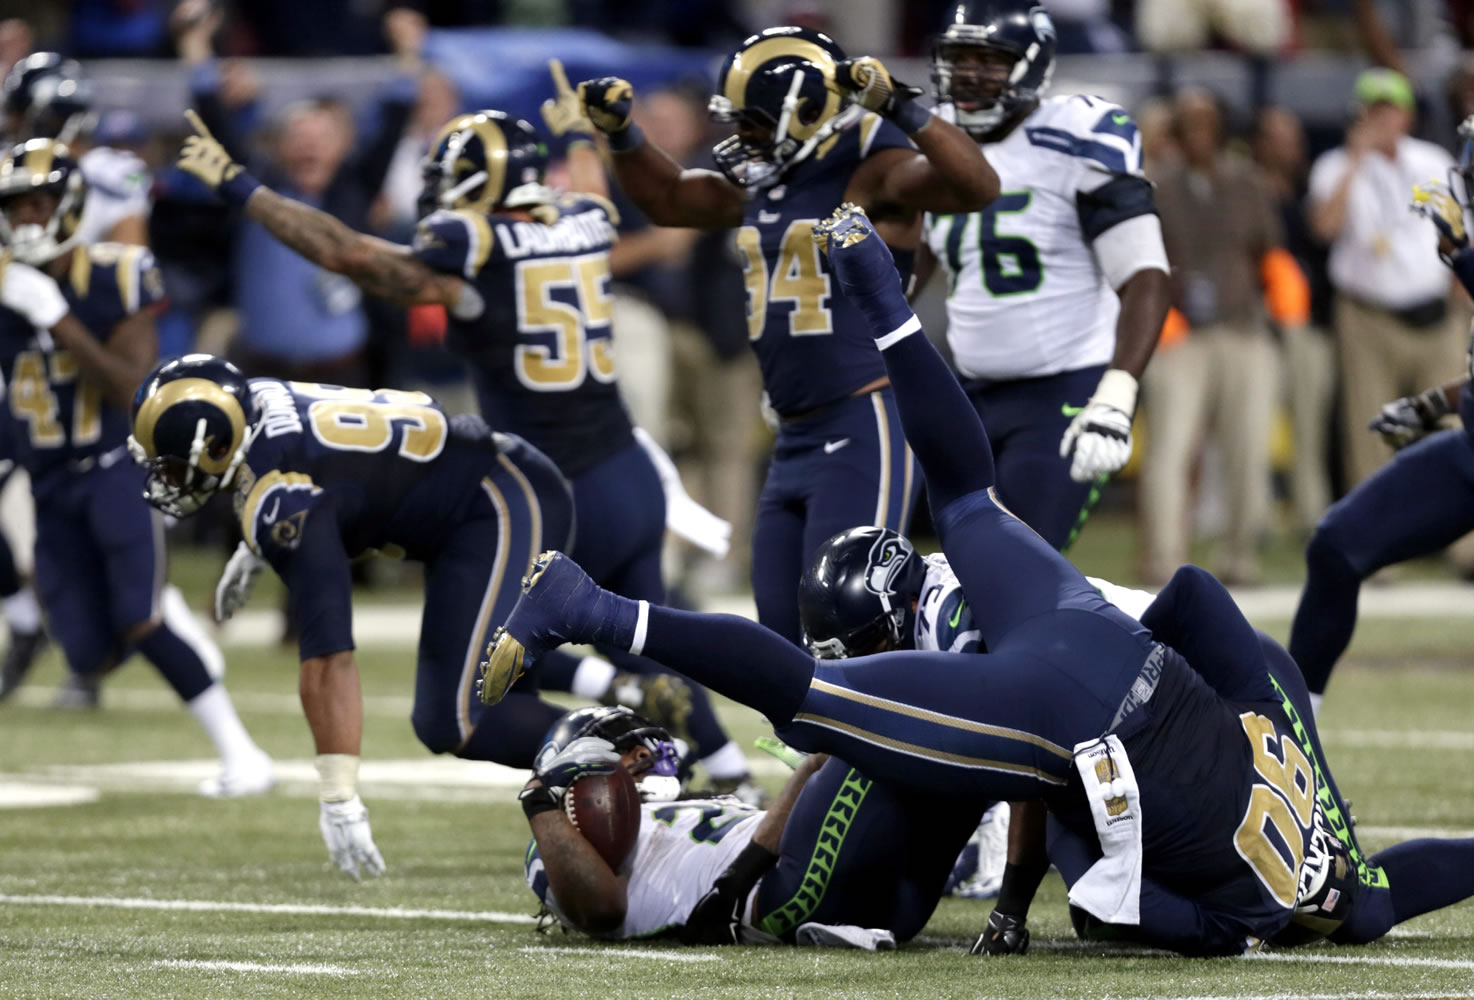 Seattle Seahawks running back Marshawn Lynch lands on his back as he is stopped on fourth down and St. Louis Rams players celebrate on the final play in overtime on Sunday, Sept. 13, 2015, in St. Louis. The Rams won 34-31.